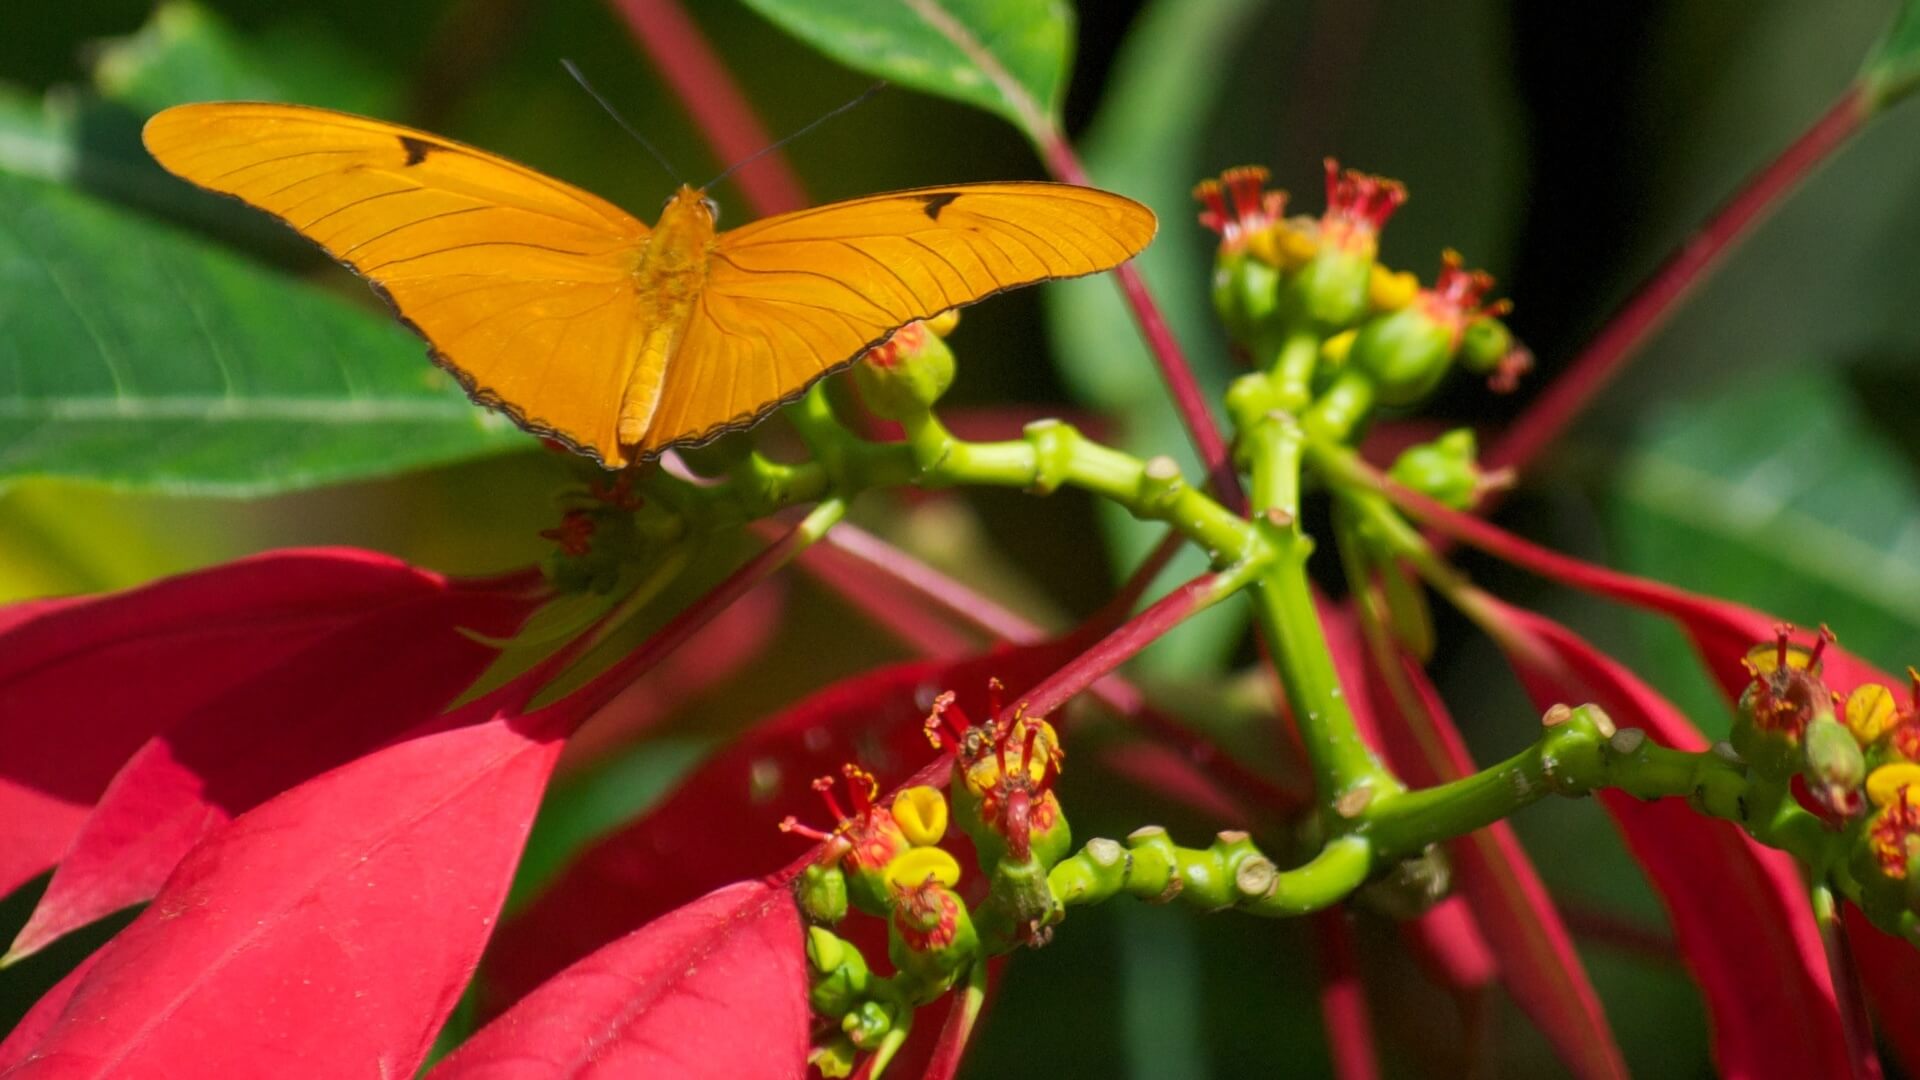 A yellow butterfly is perched on a red flower.